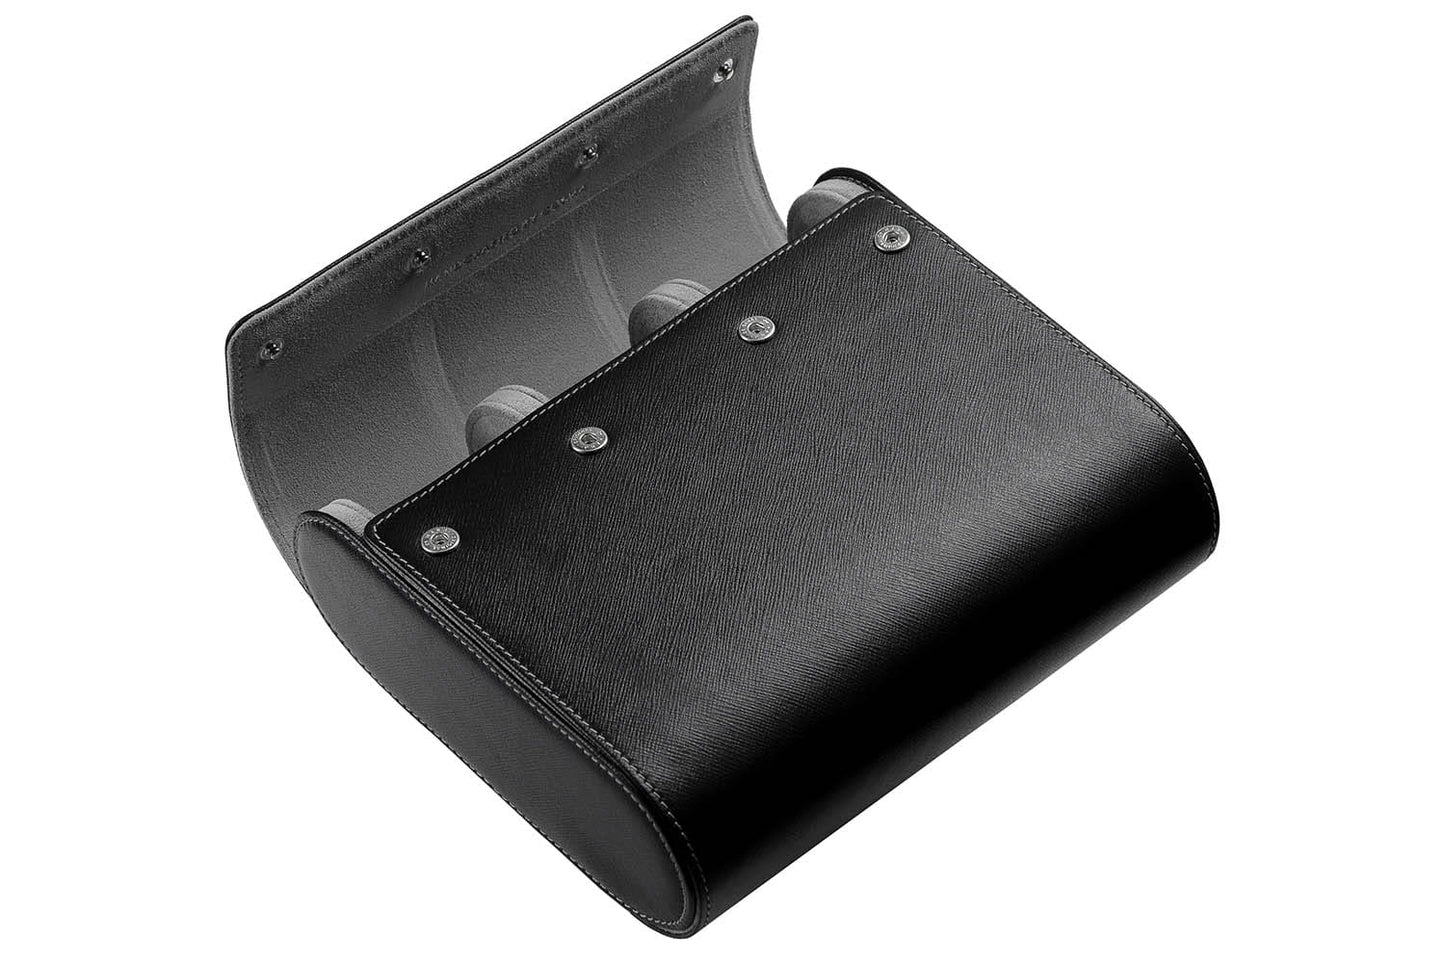 Leather Watch Case for 6 watches - Saffiano Black / Light Gray